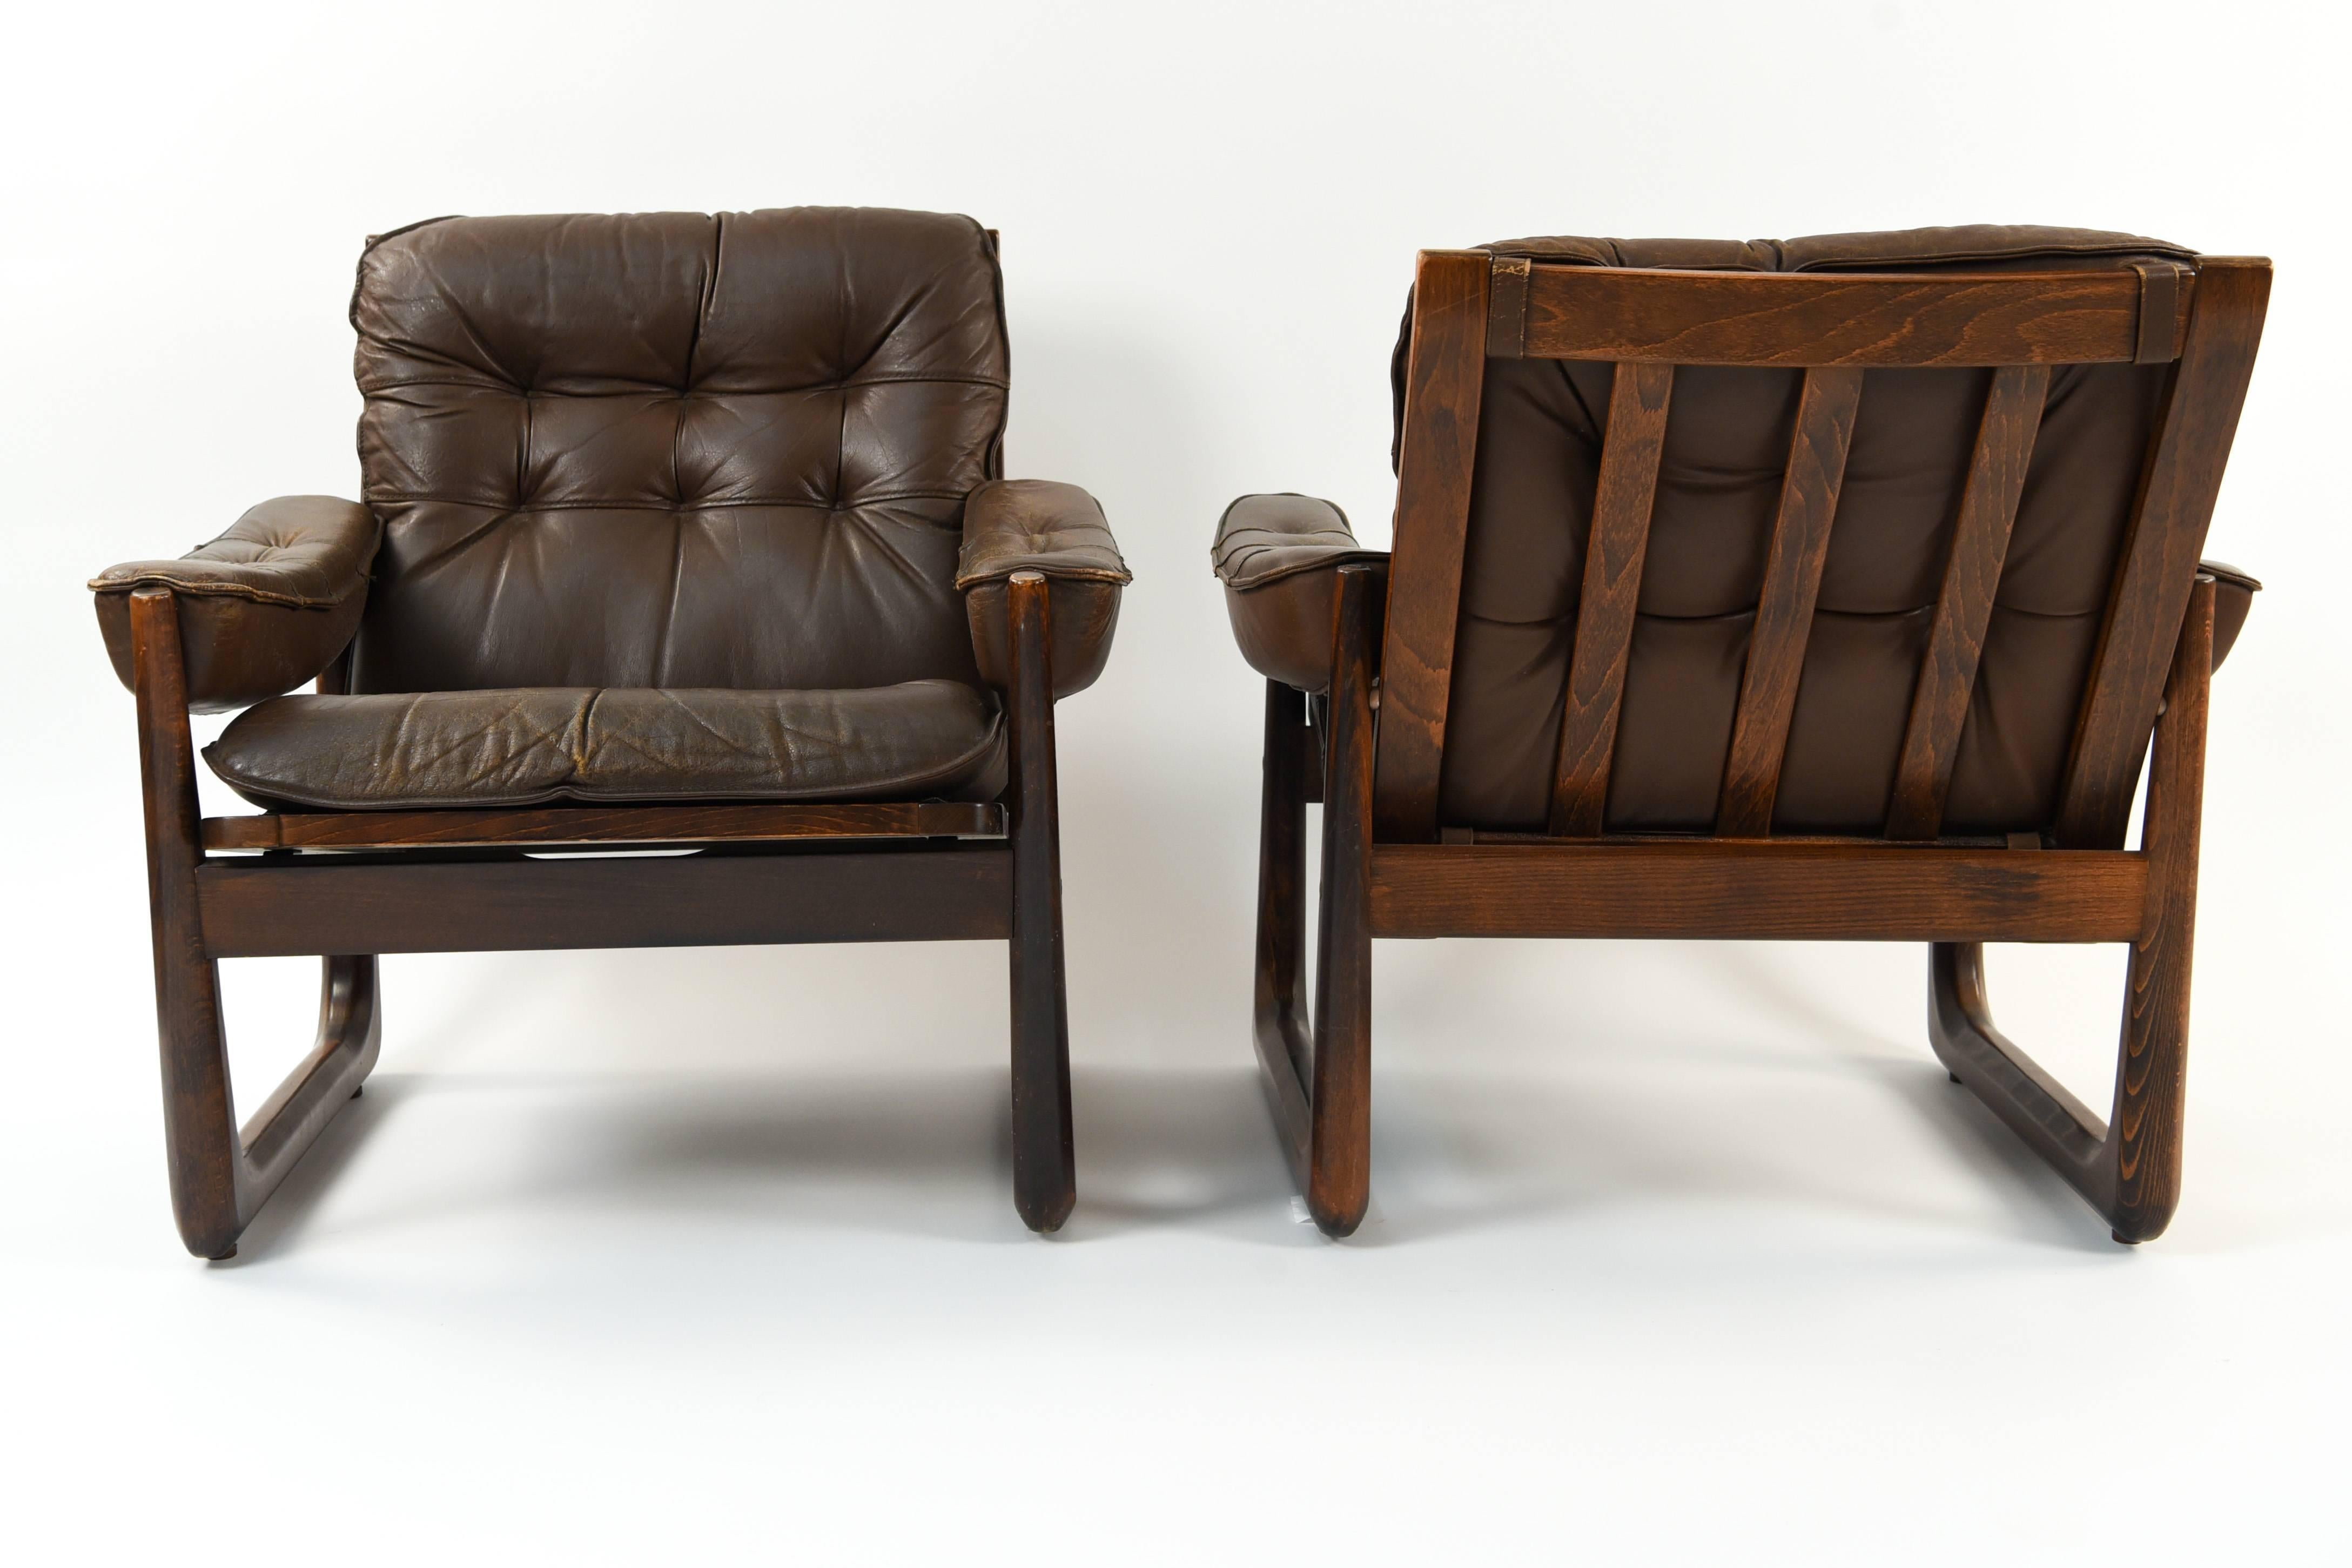 Stained Pair of Norwegian Oddvar Vad Leather Lounge Chairs, circa 1970s